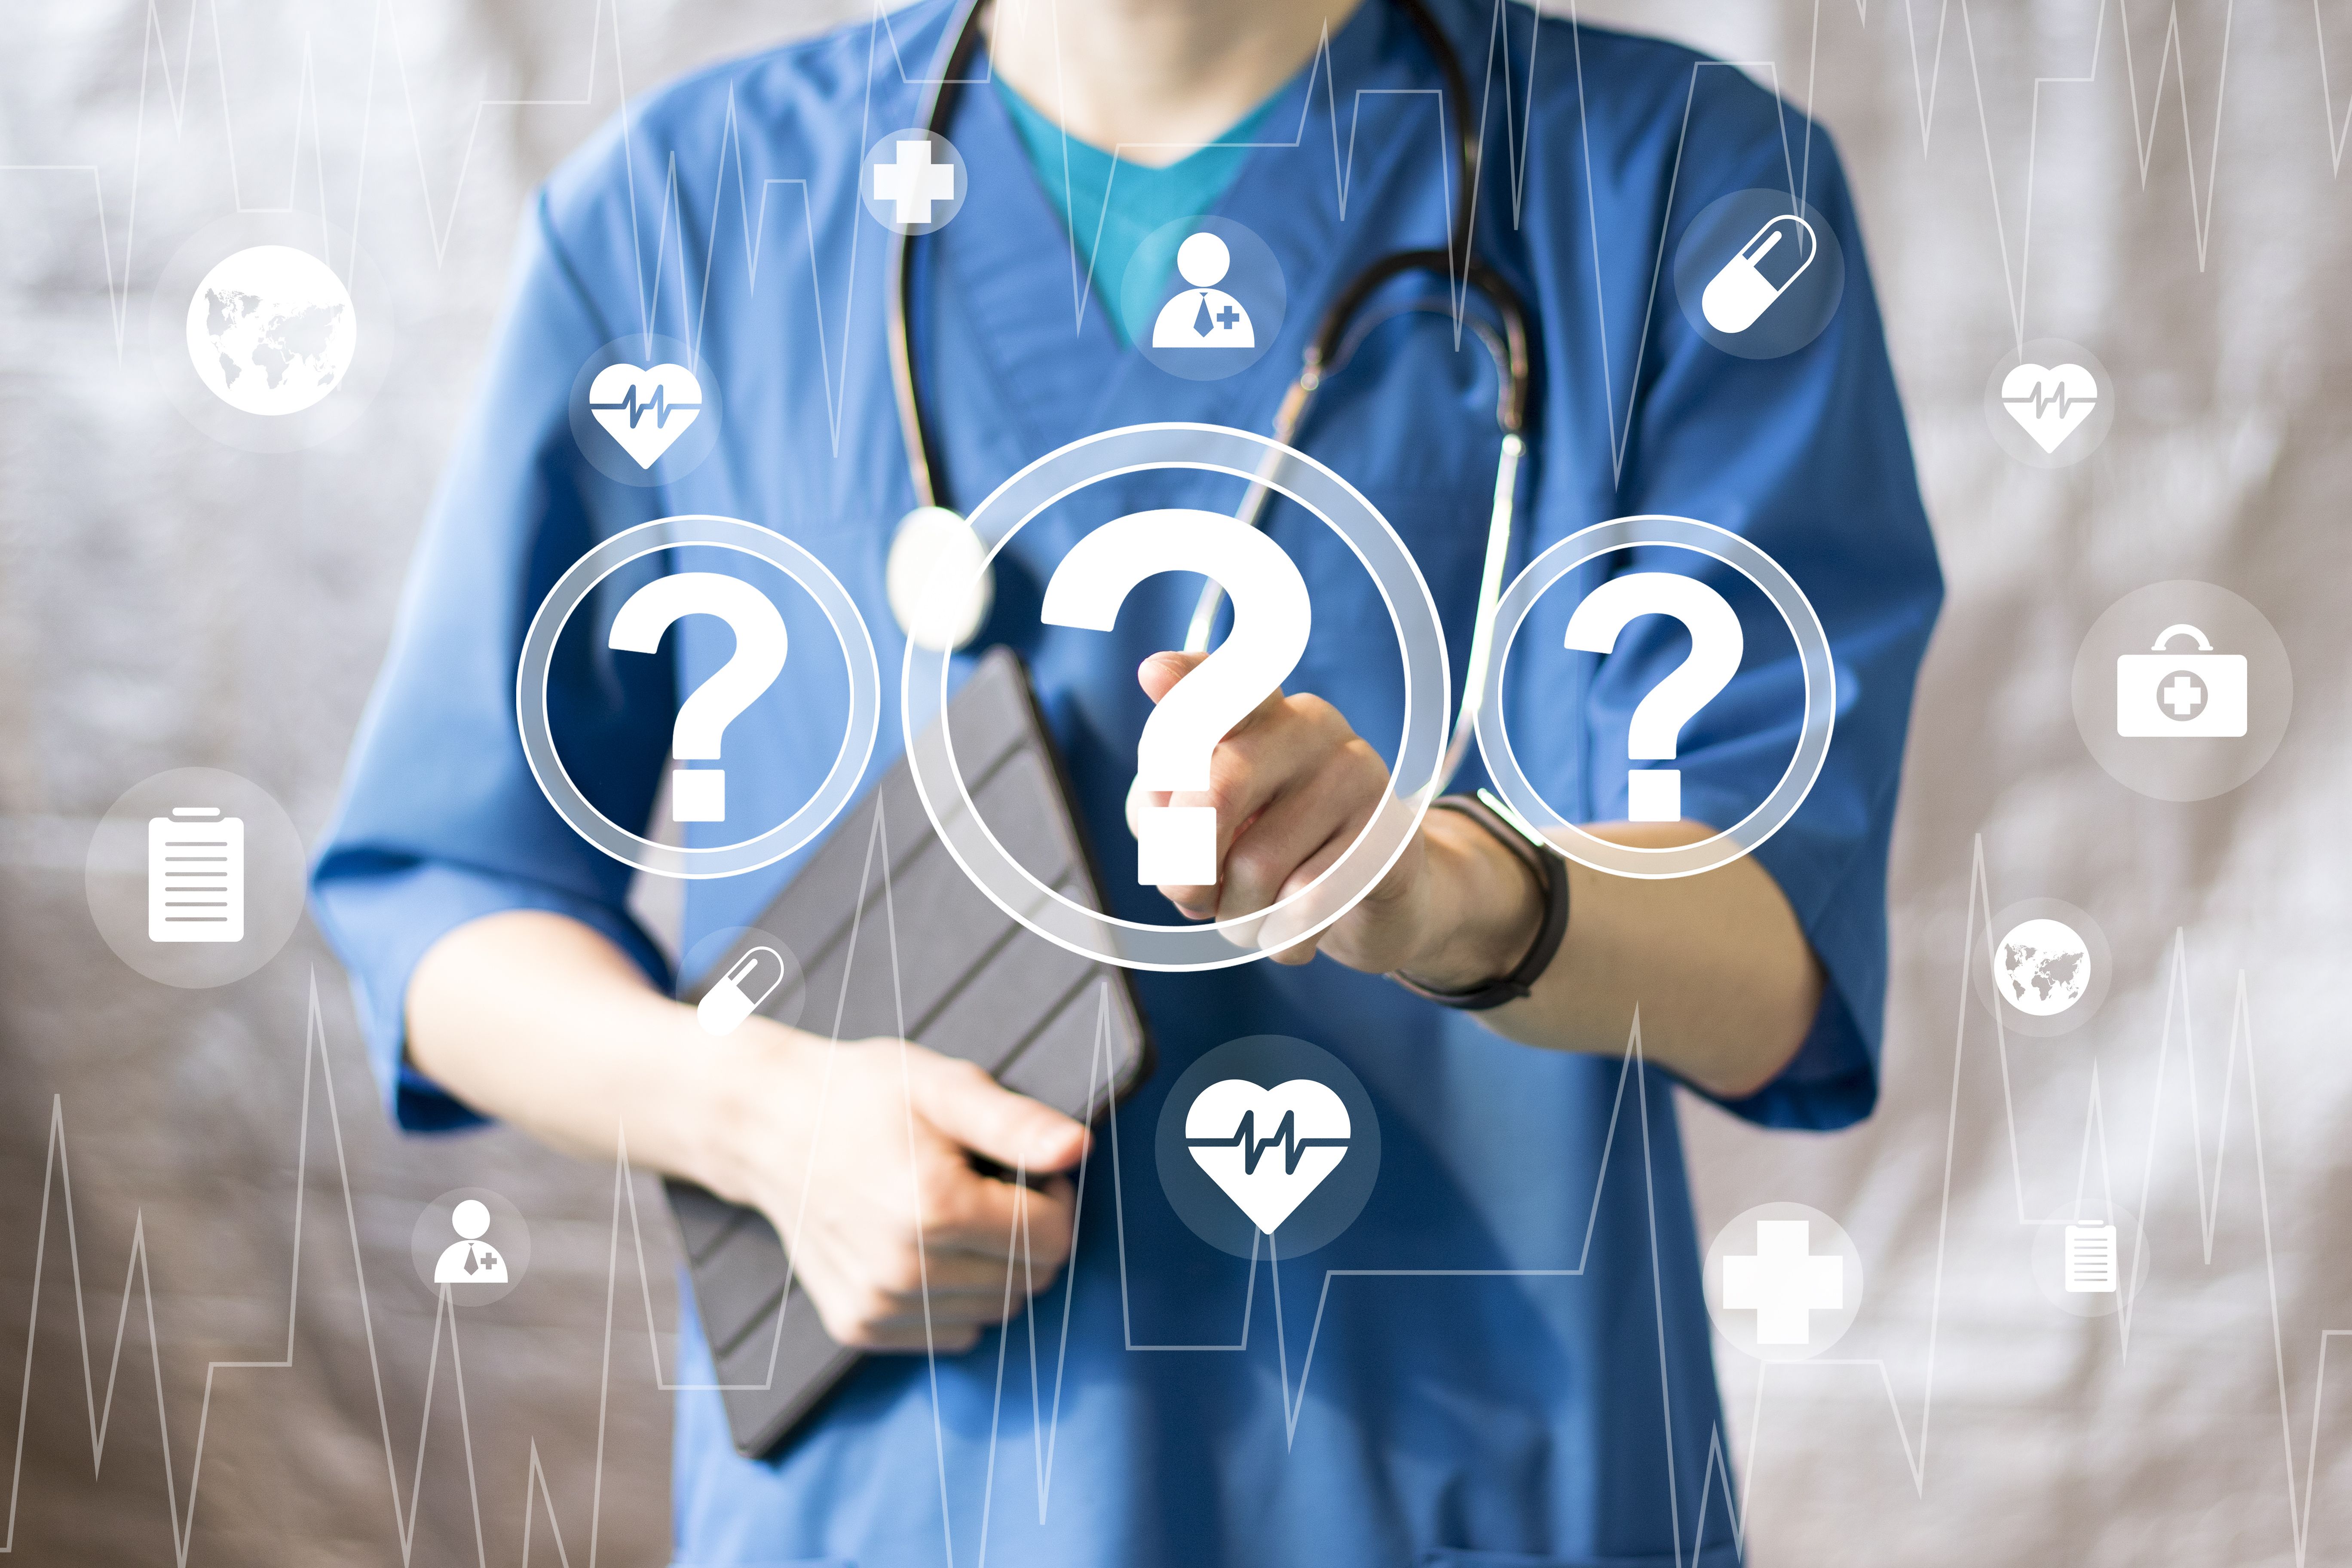 3 Approaches to Creating a Connected Care Future - Managed Healthcare Executive